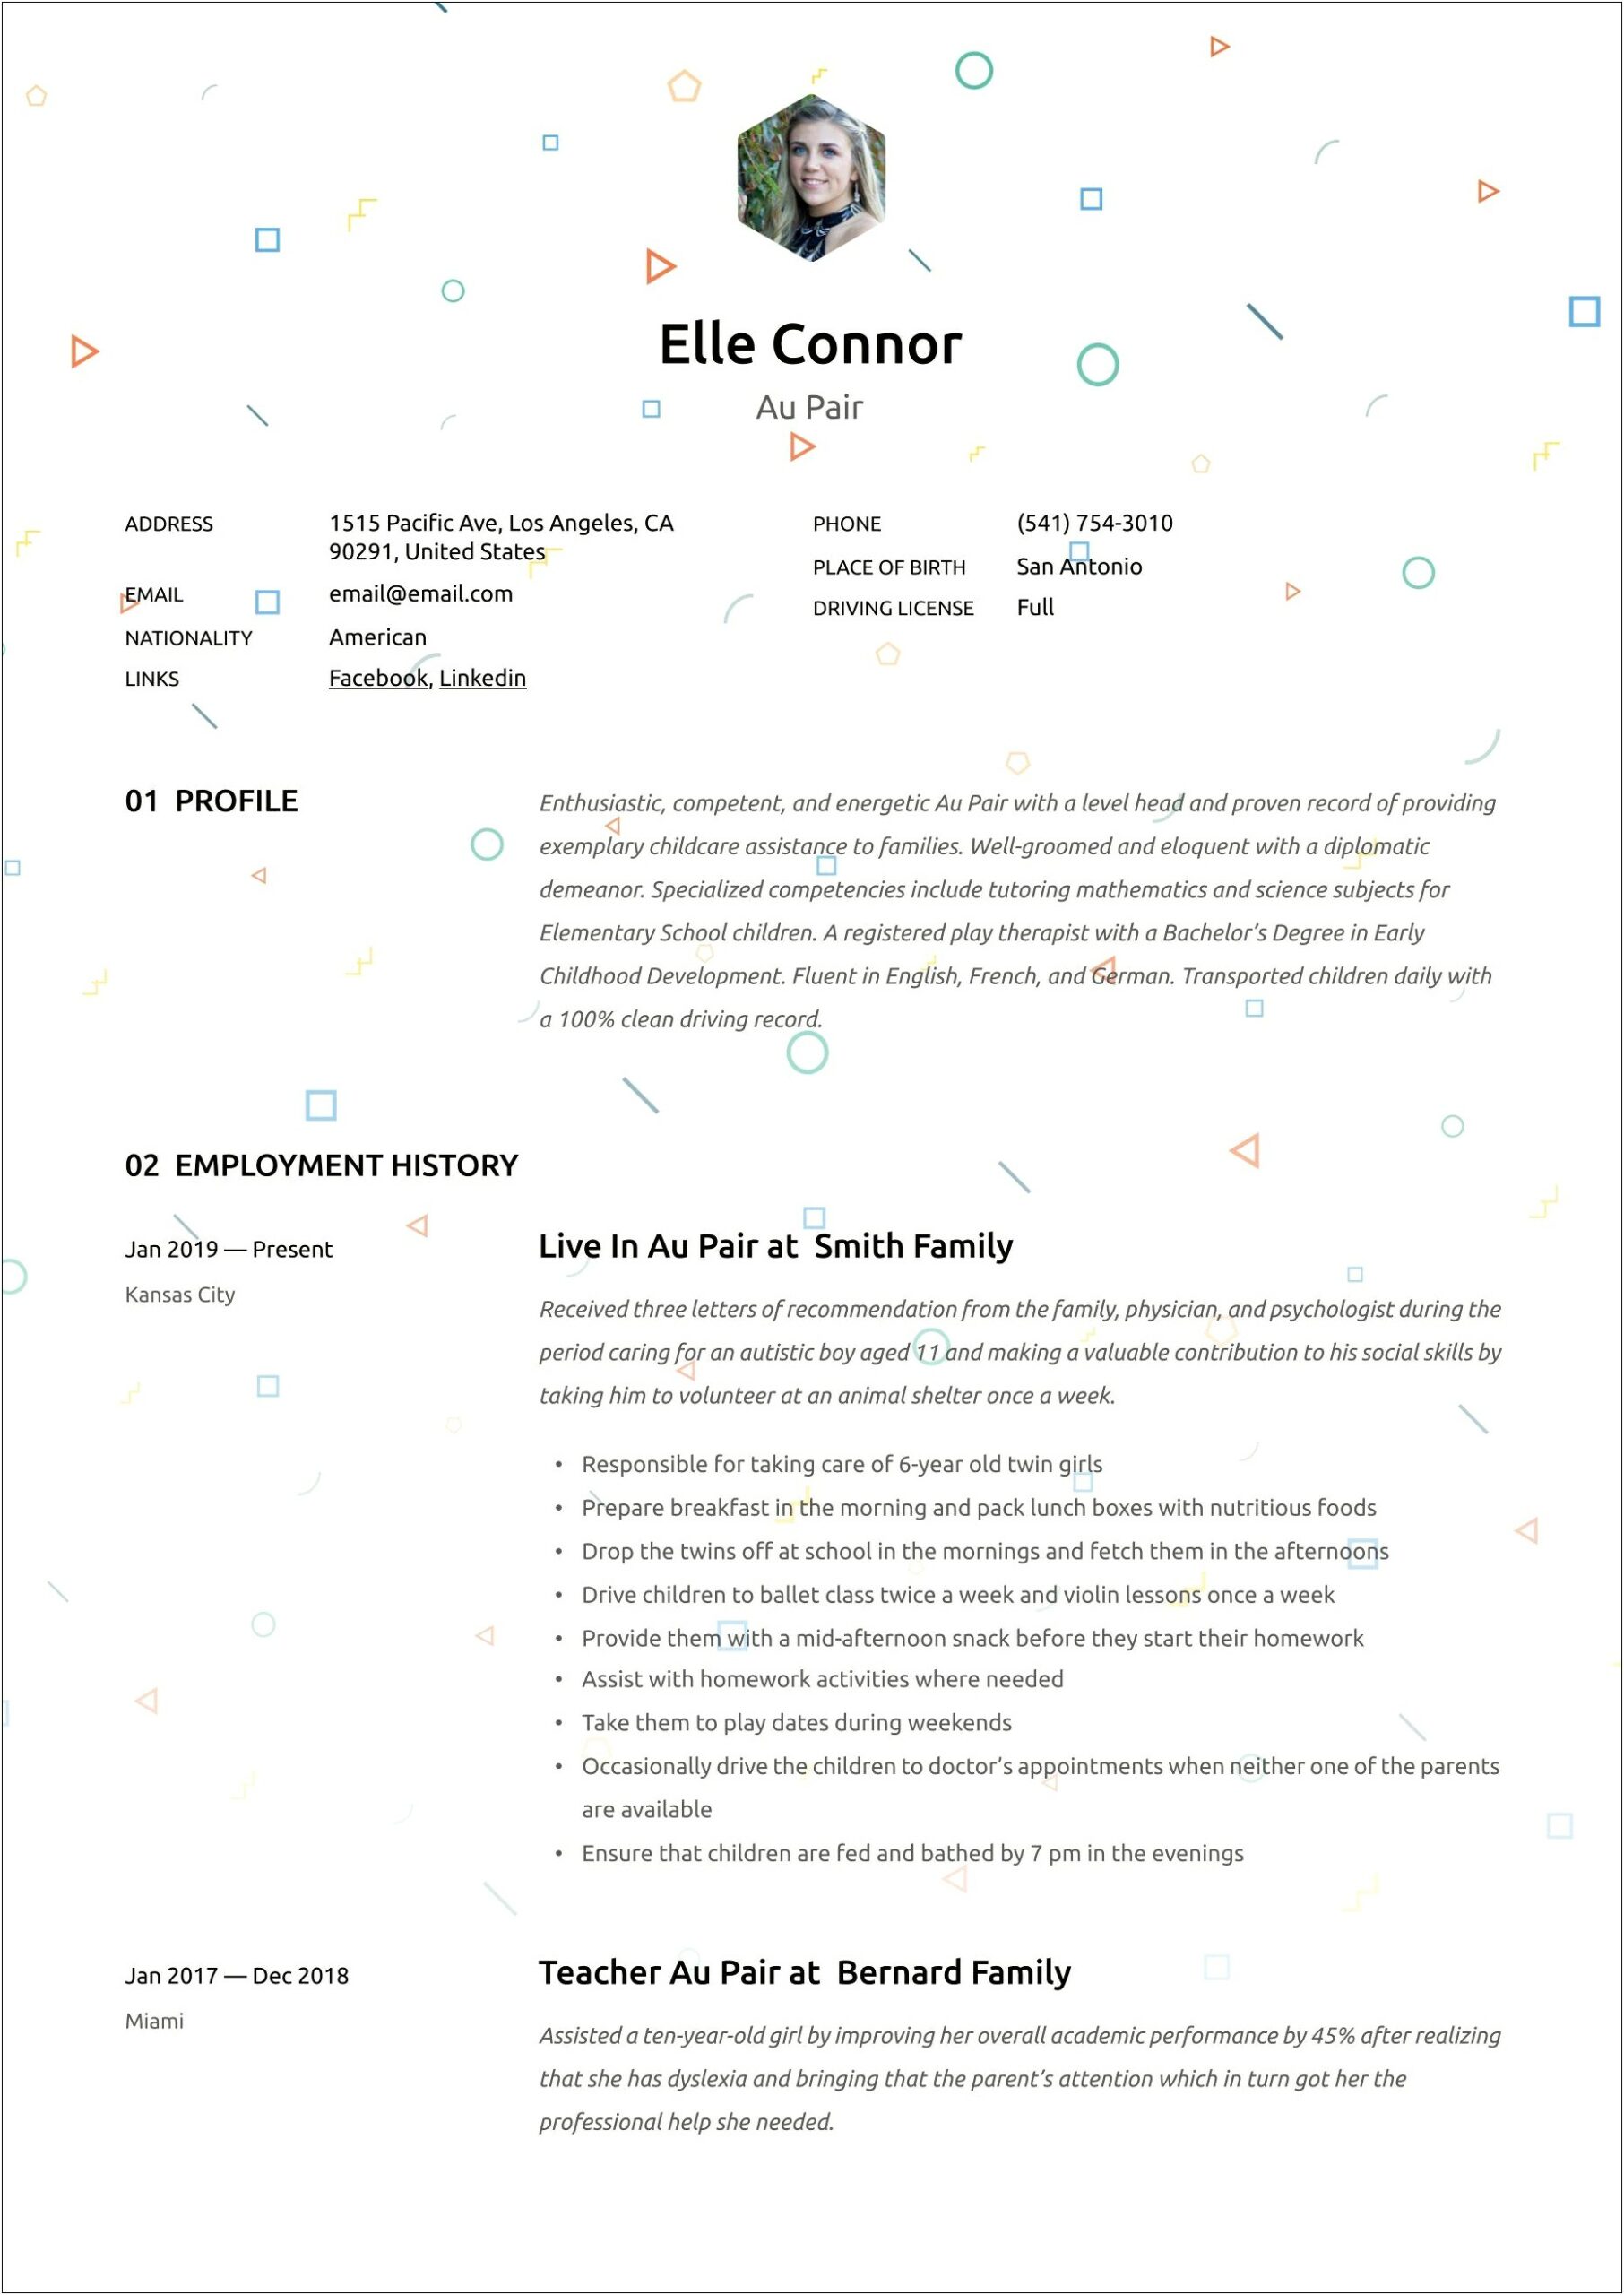 Resume Examples For Au Pair